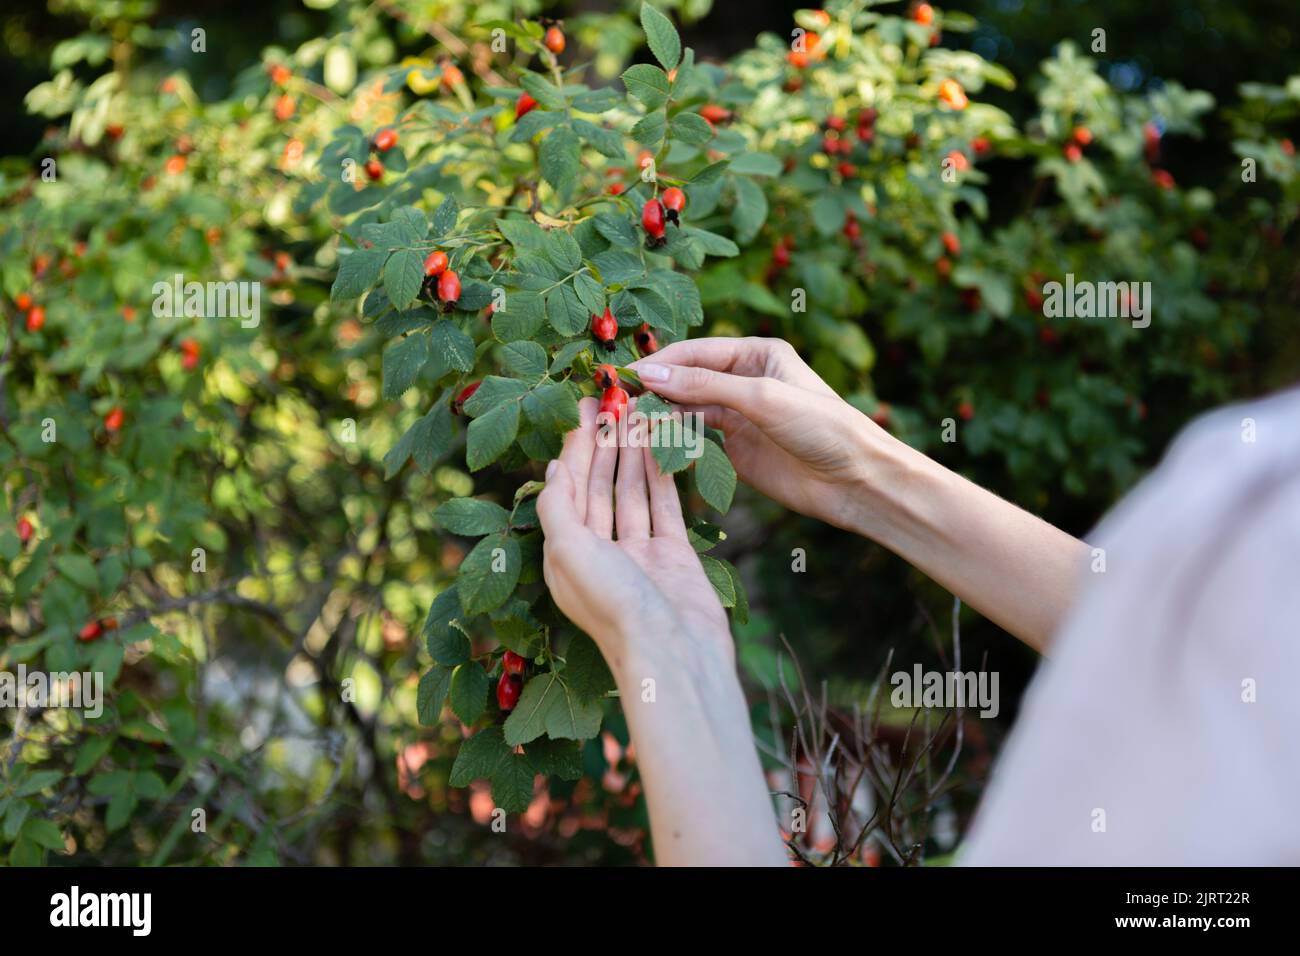 A woman collects rosehip berries from a green bush Stock Photo